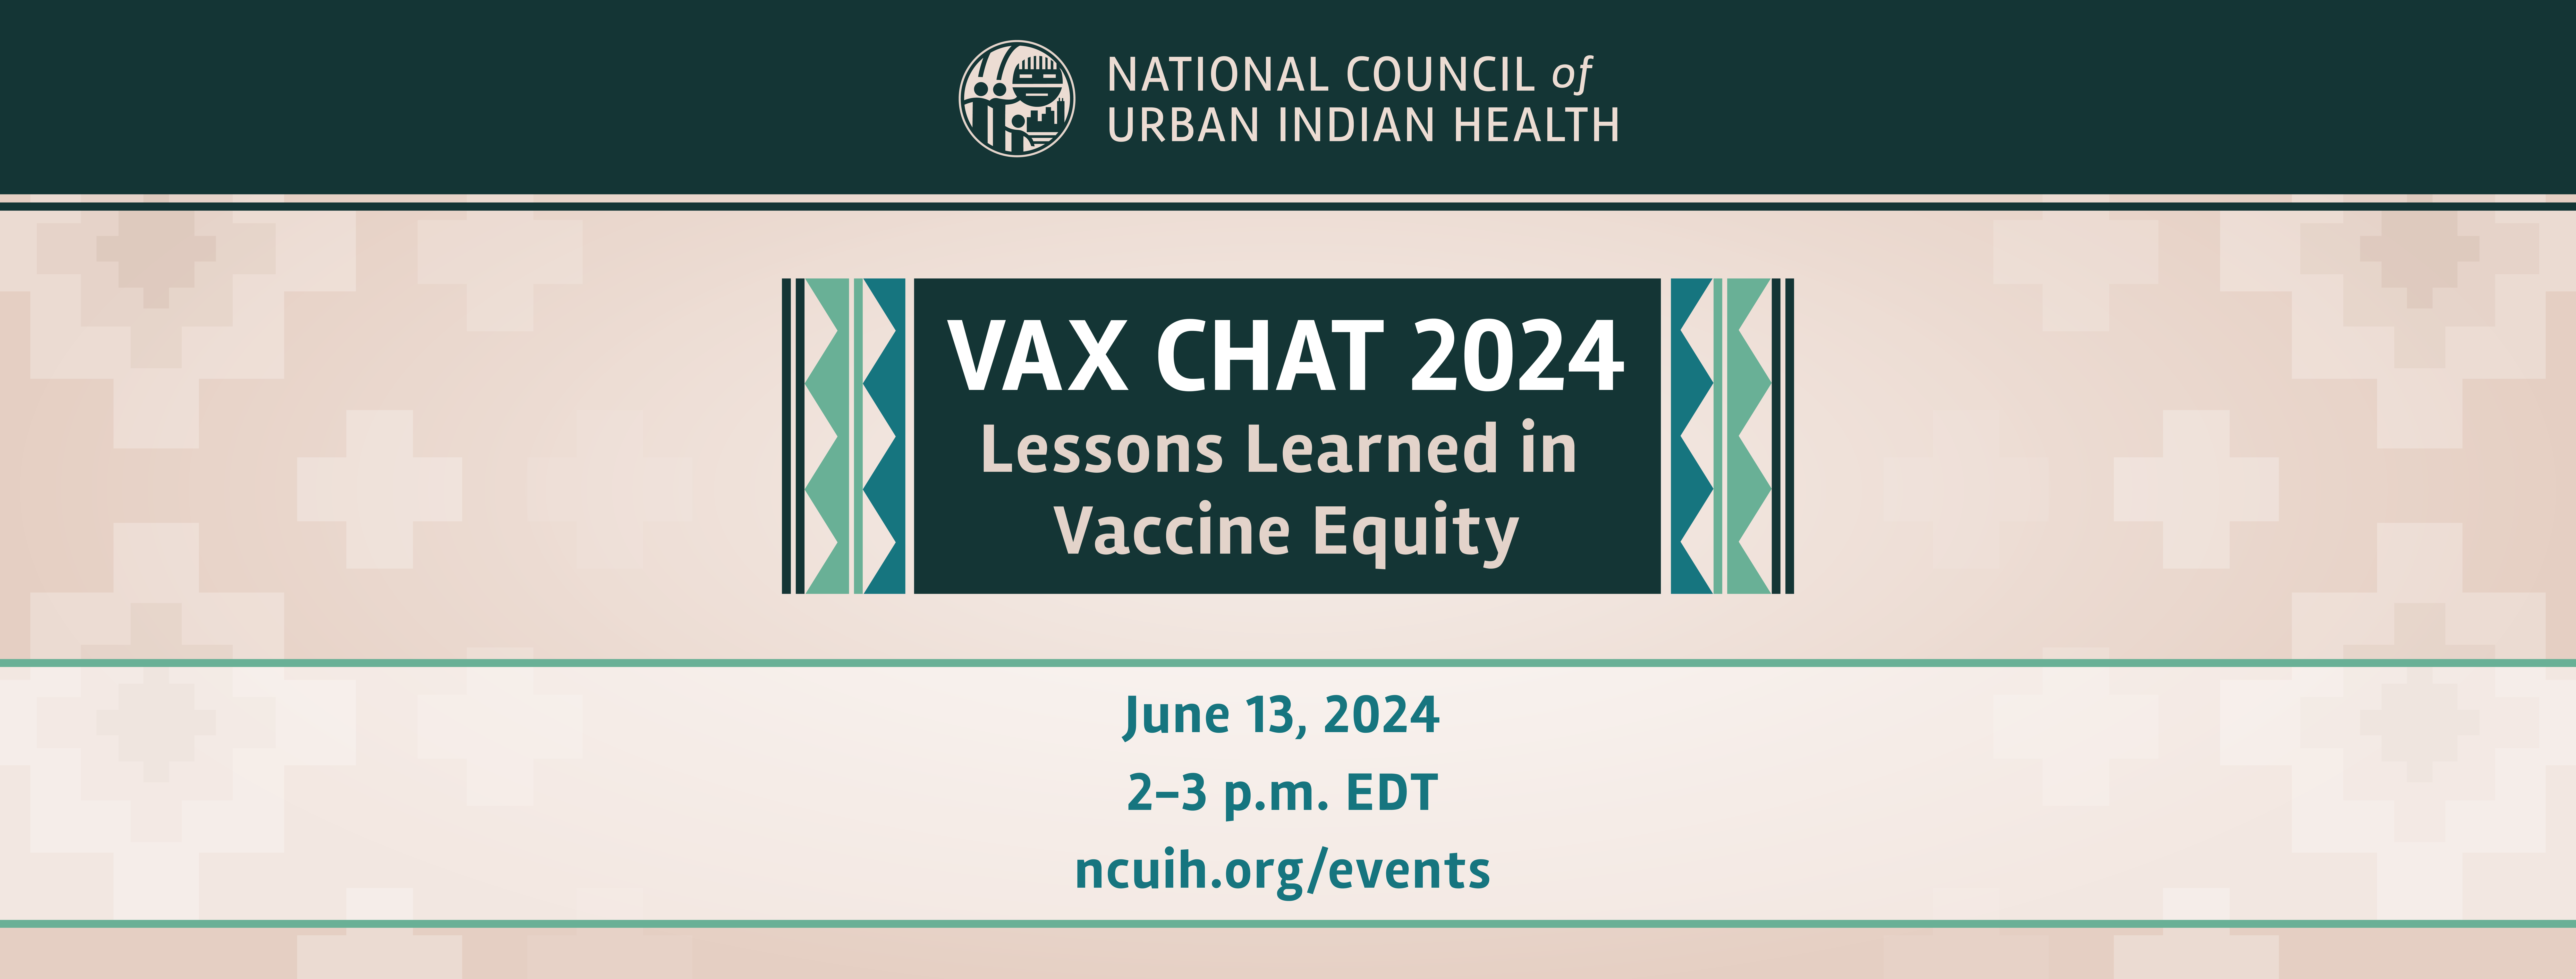 Vax Chat 2024: Lessons Learned in Vaccine Equity